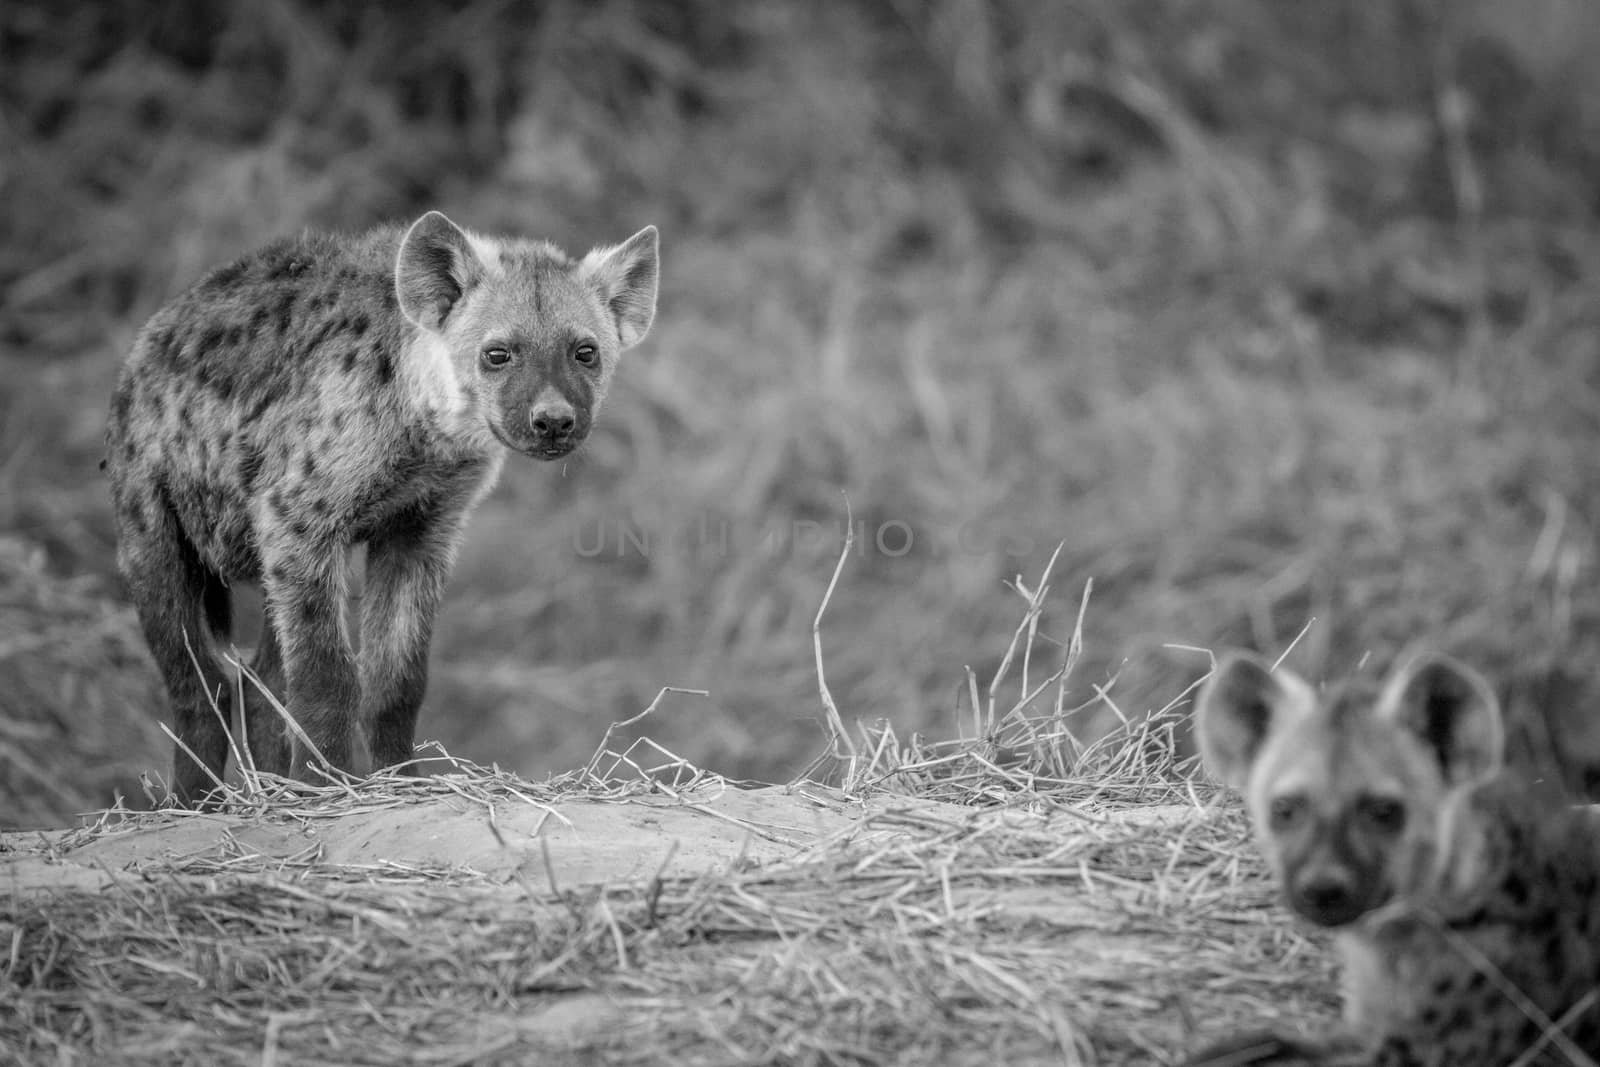 Young Spotted hyena starring at the camera in black and white in the Chobe National Park, Botswana.